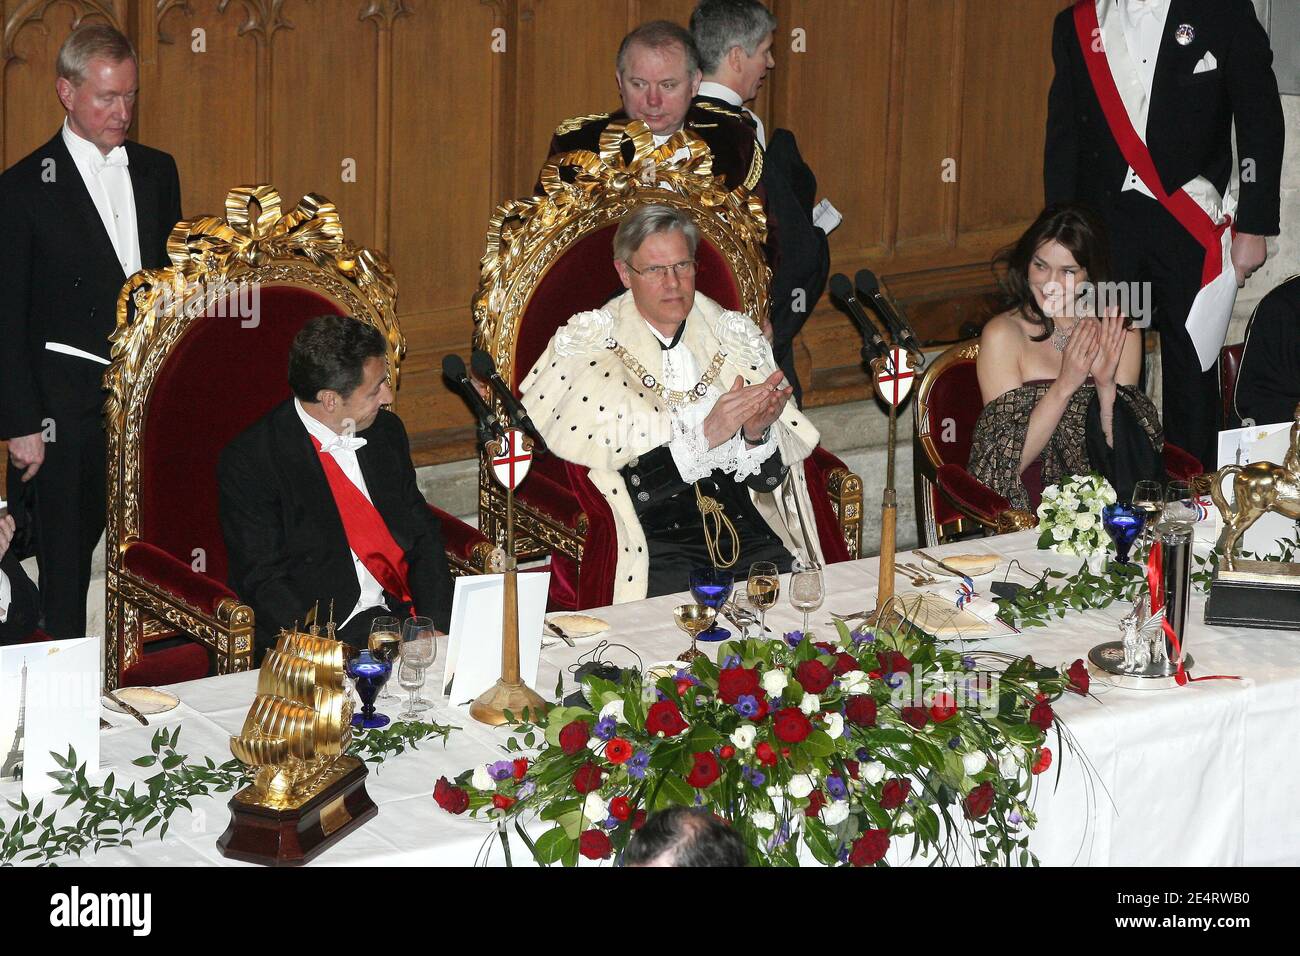 French President Nicolas Sarkozy and his wife Carla Bruni-Sarkozy attend a diner offered by London city mayor, David Lewis at the Guildhall in London, UK on March 27, 2008. Photo by Alain Benainous/Pool/ABACAPRESS.COM Stock Photo